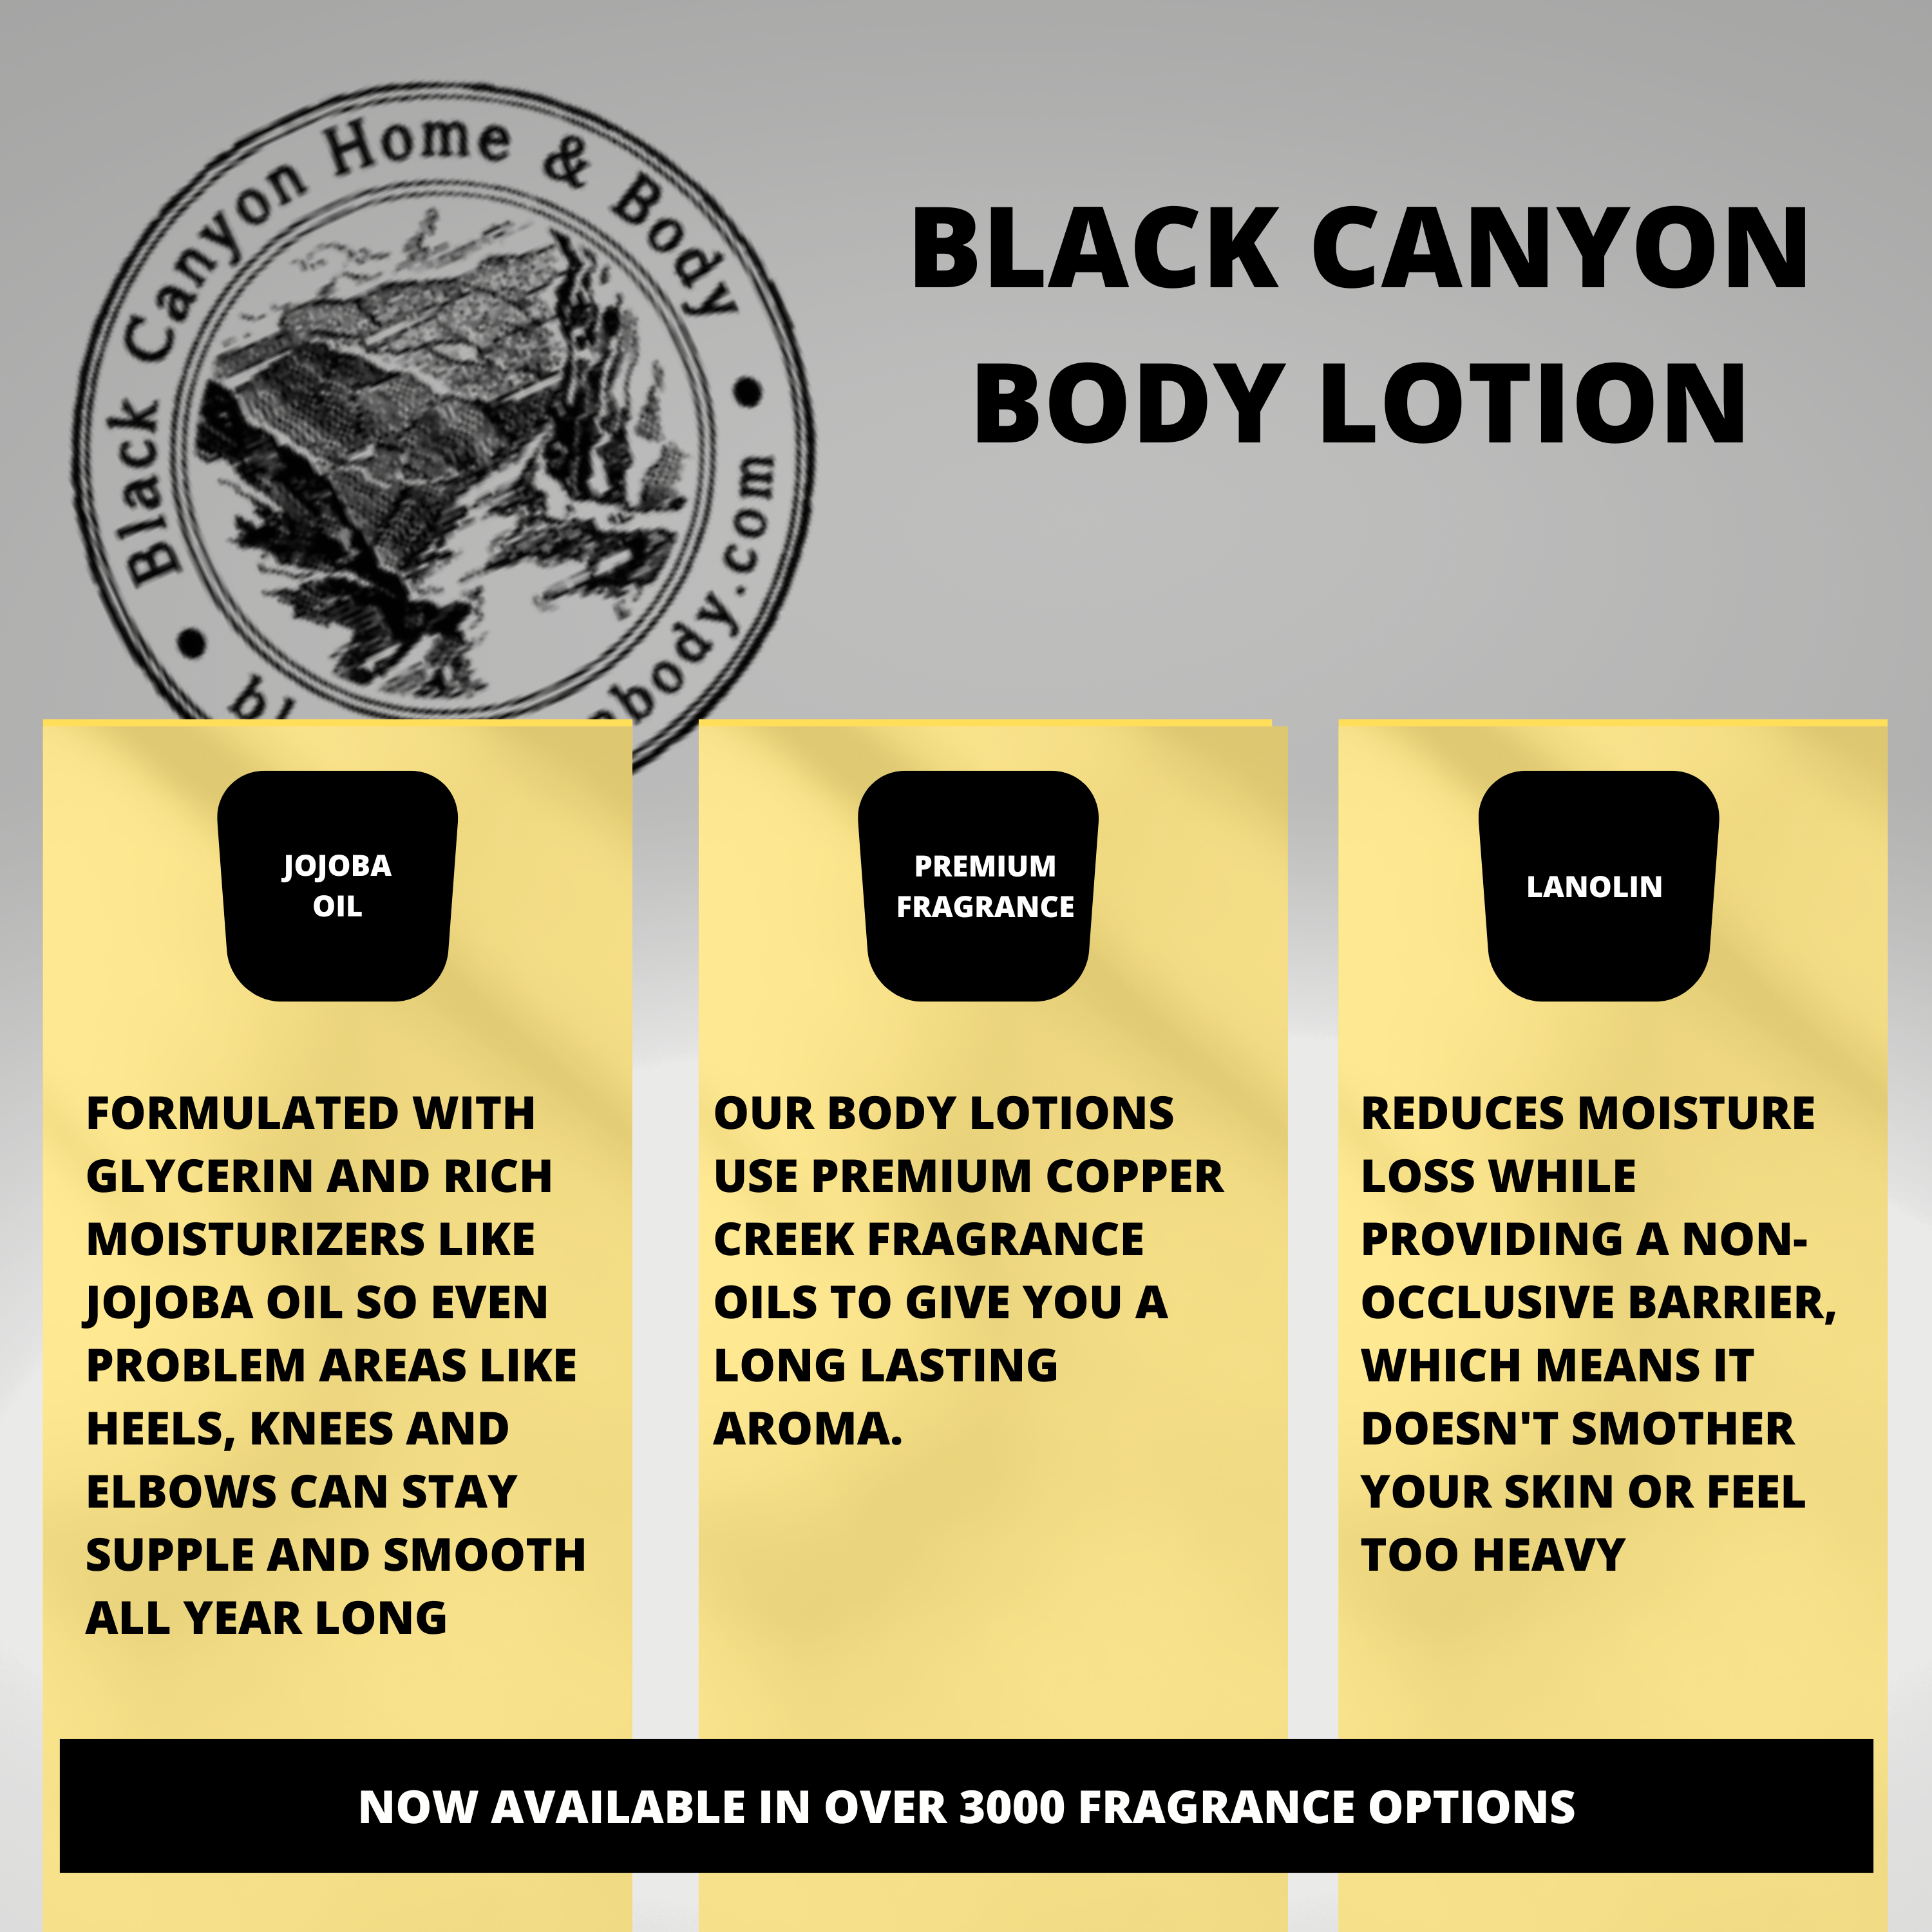 Black Canyon Bartlett Pear & Brandy Scented Luxury Body Lotion with Lanolin and Jojoba Oil